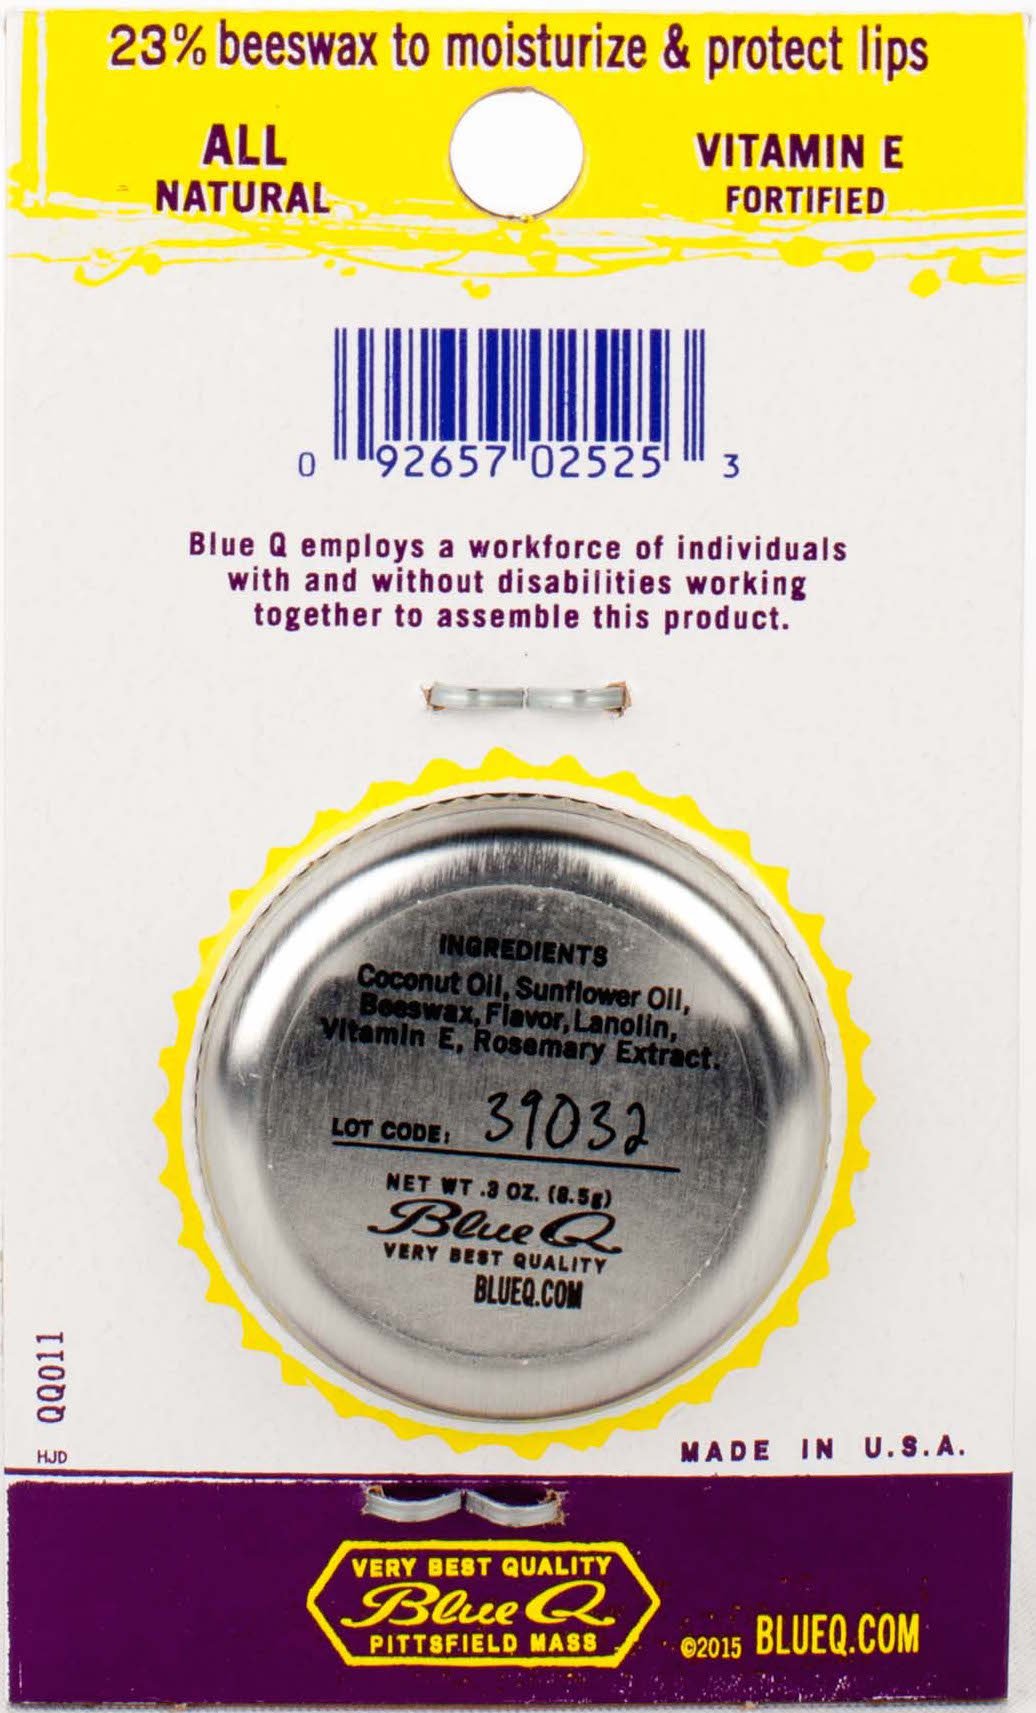 The back of the packaging for Blue Q lip shit Pineapple brown sugar, showing the ingredients of the product